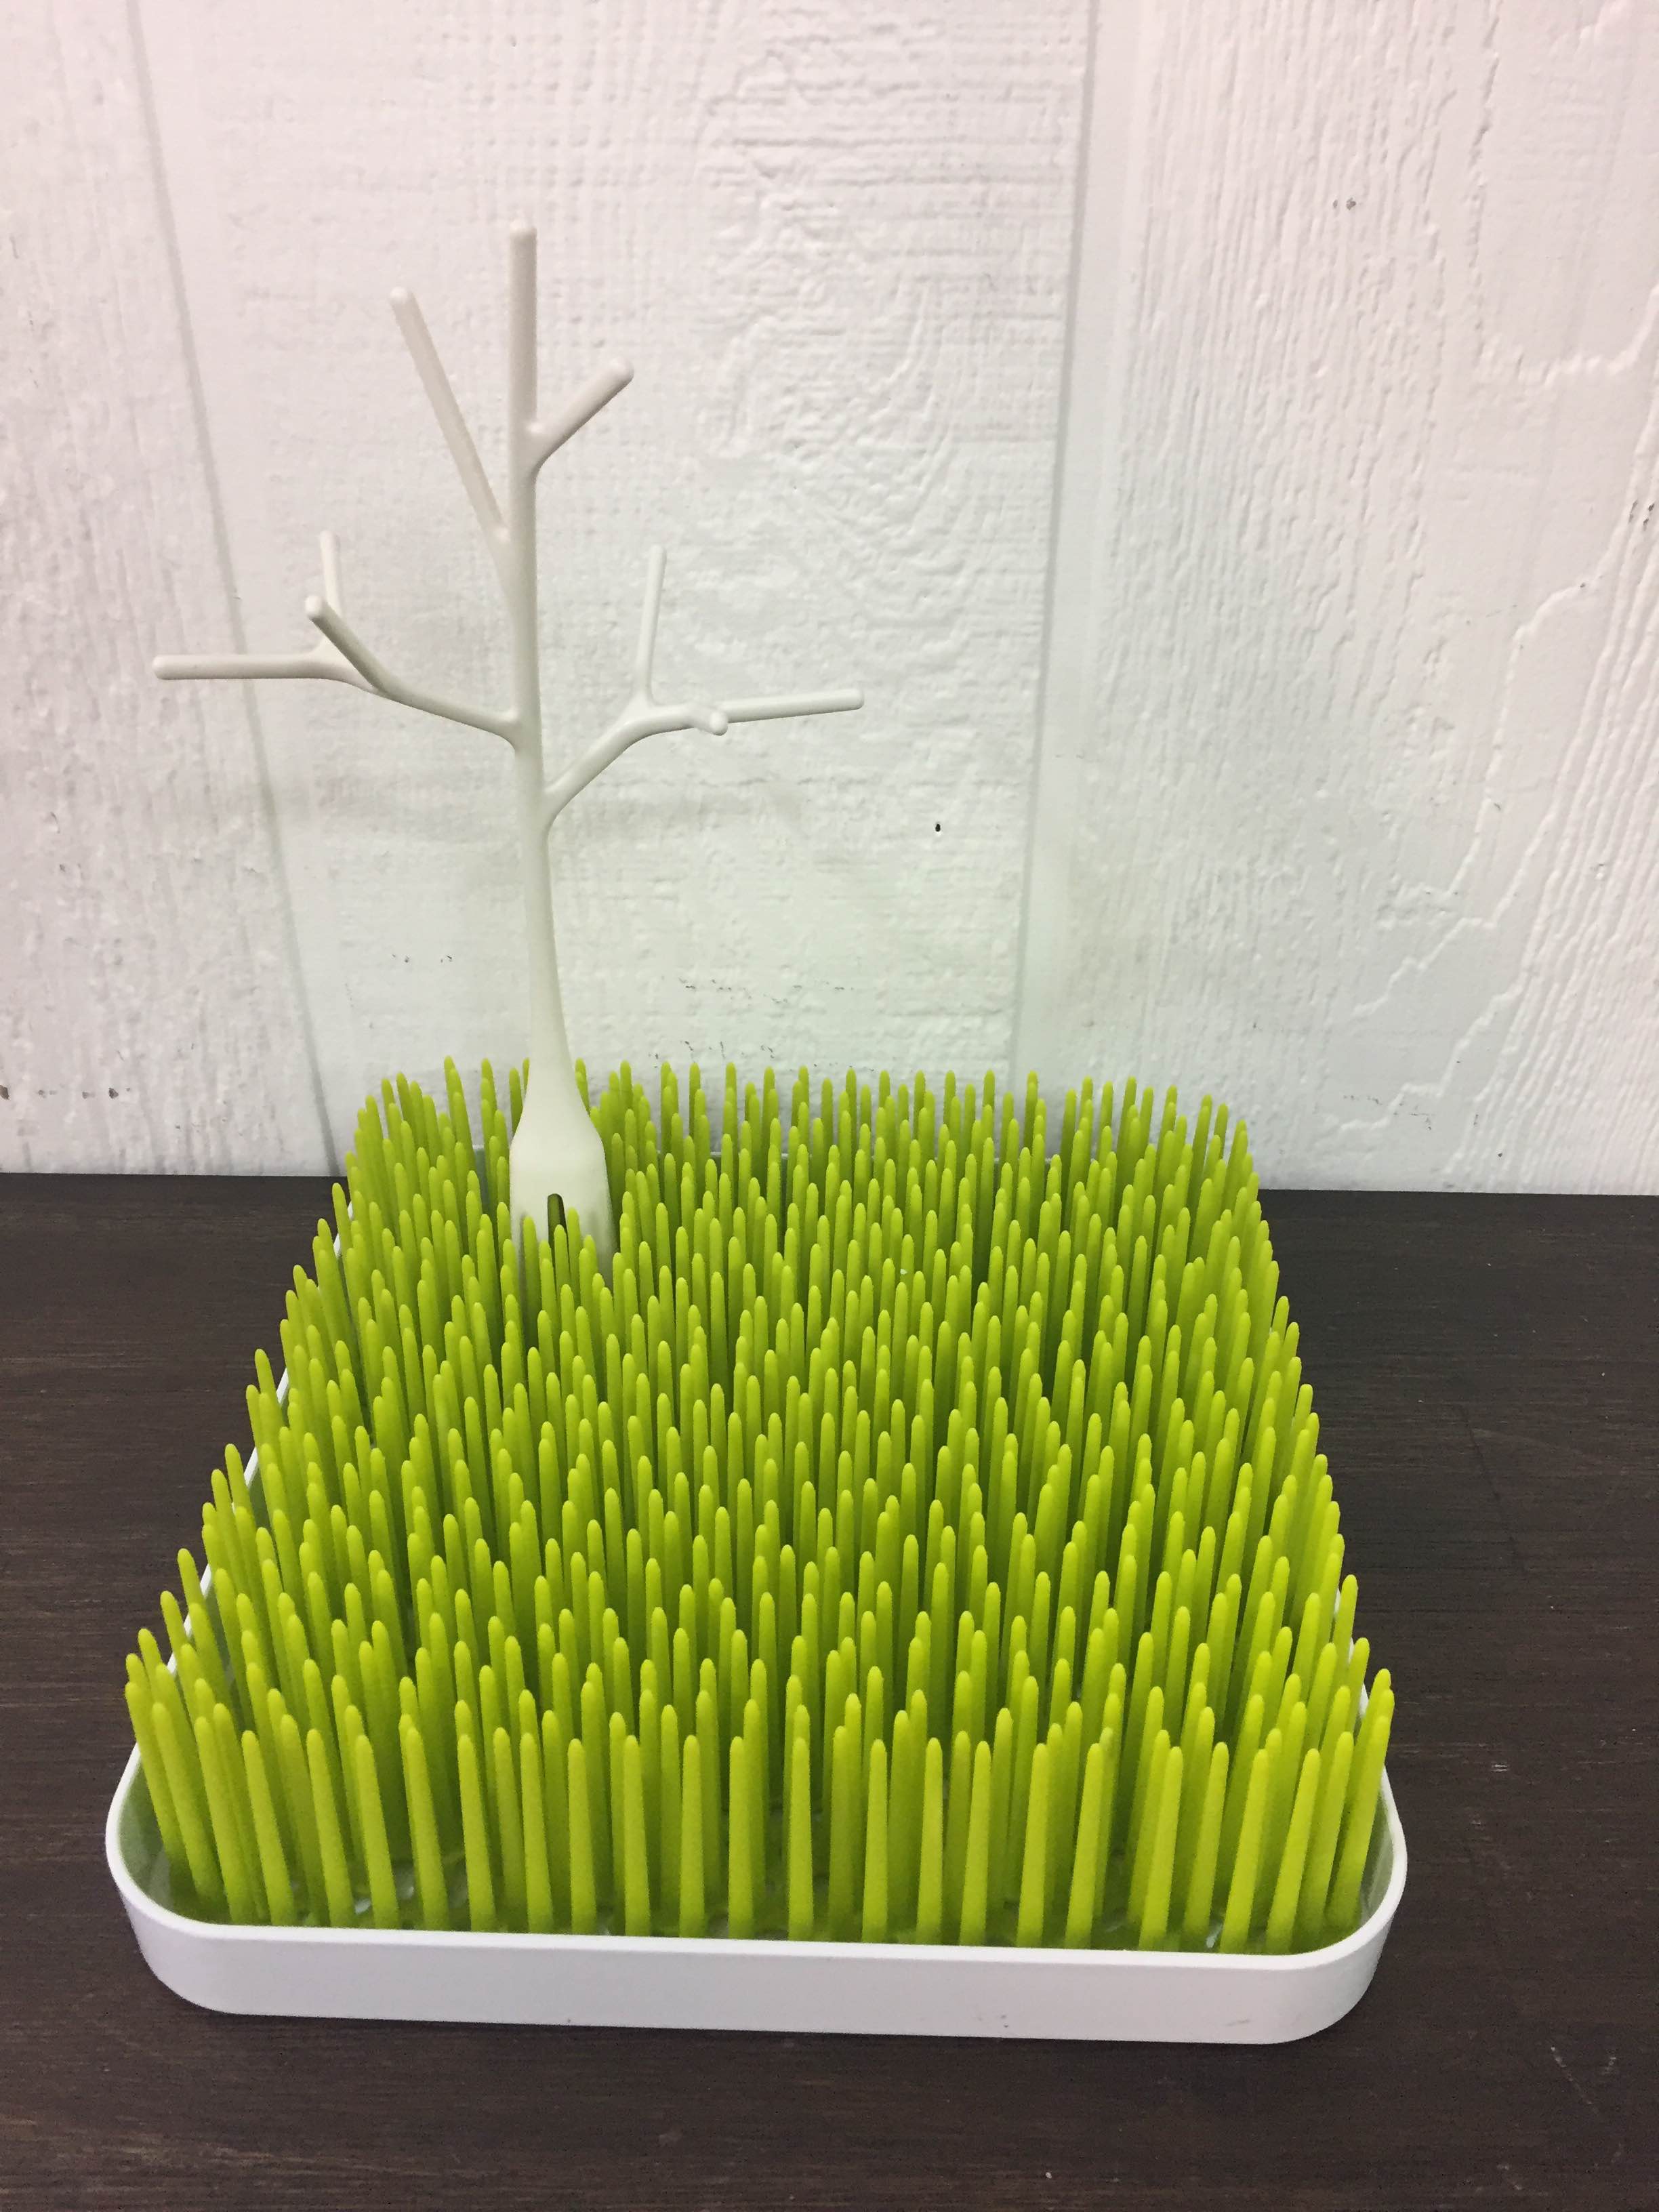 Boon Grass Countertop Drying Rack With Twig Accessory